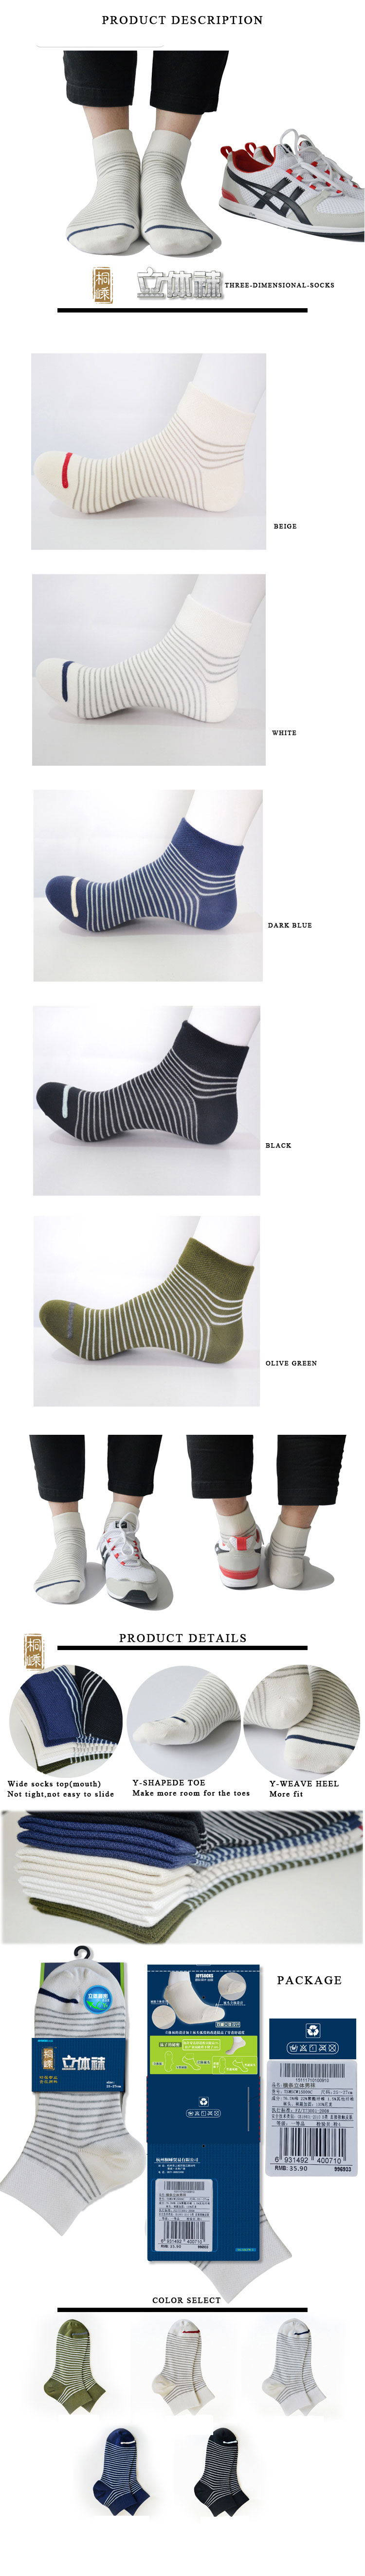 Three Dimensinal Ankle Socks Tsmscw15007c Product Details